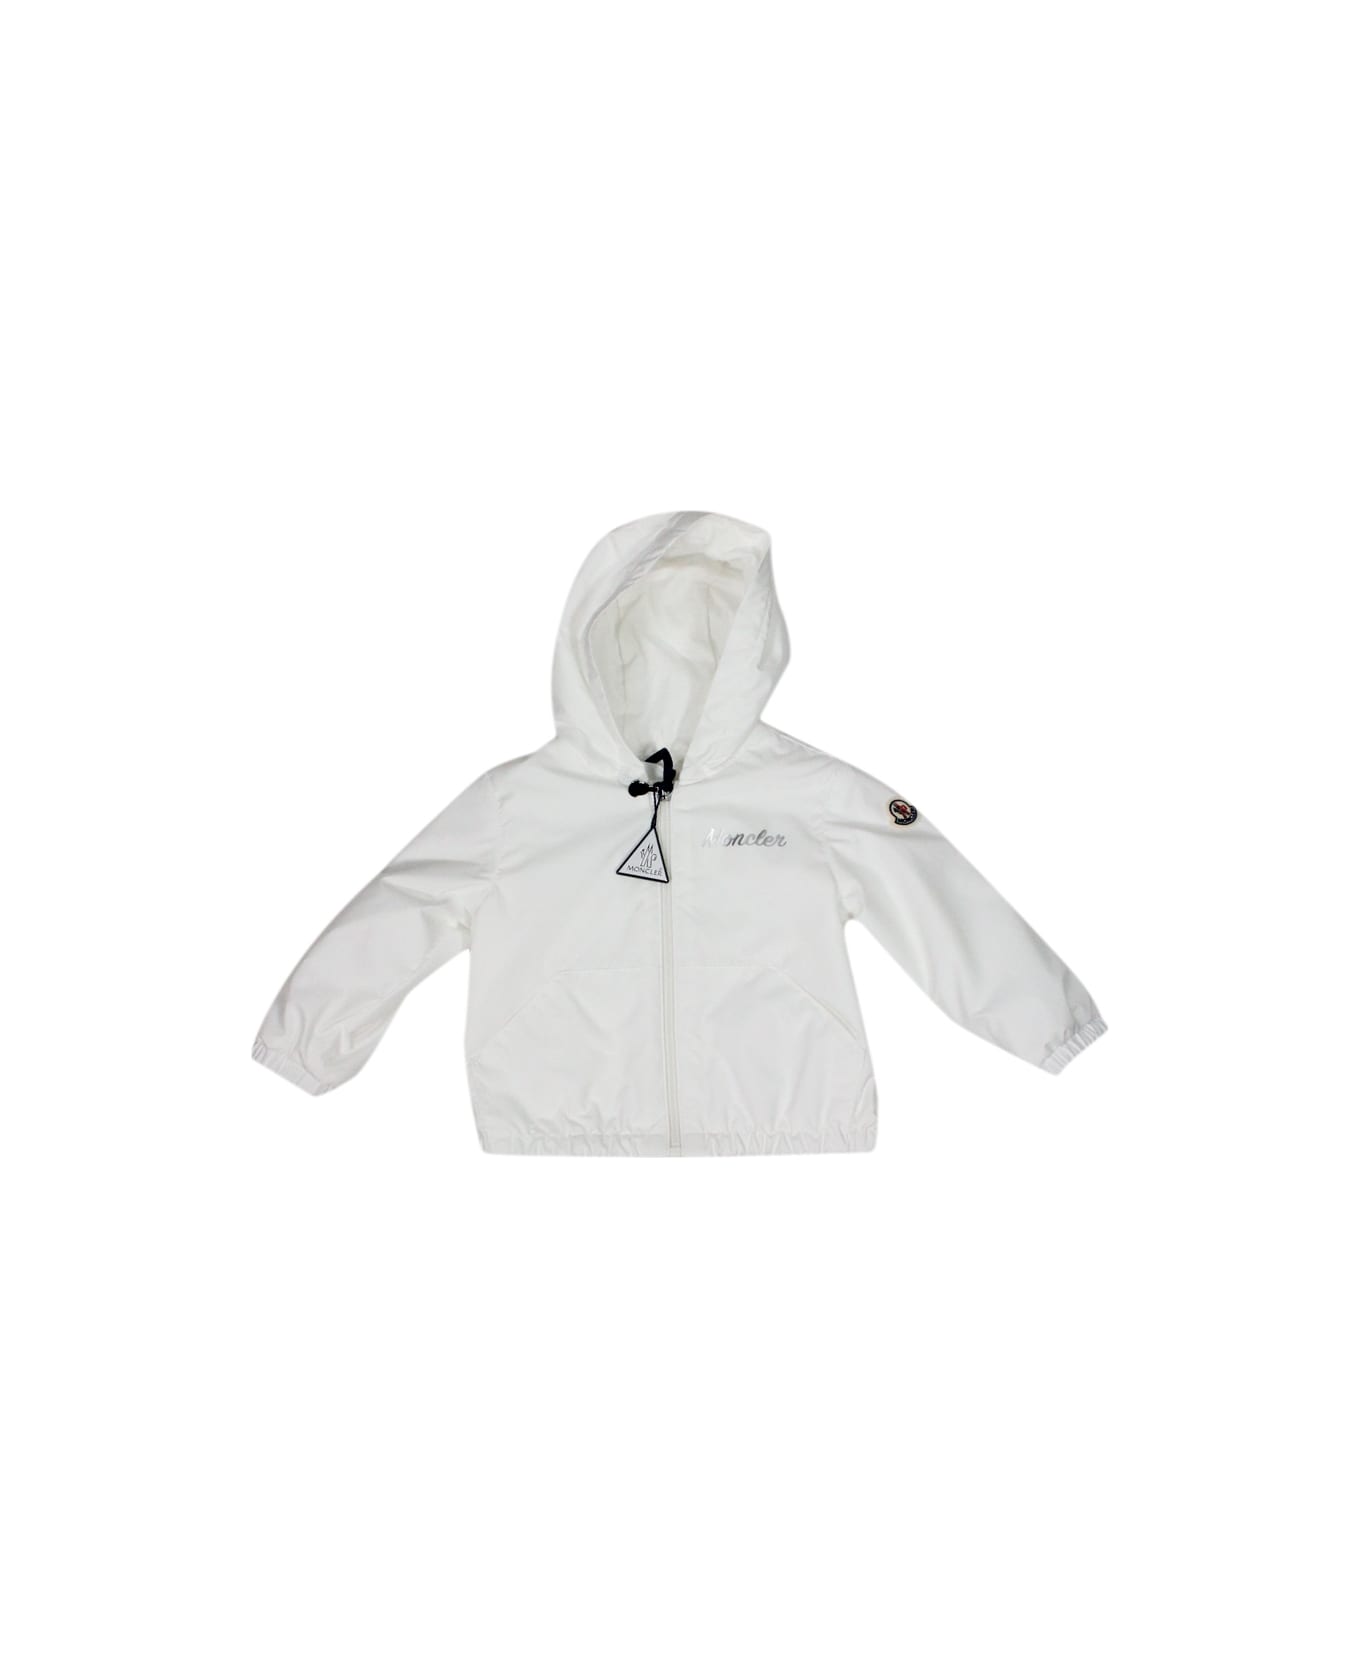 Moncler Evanthe Baby Windproof Jacket With Hood And Zip Closure And Silver Logo Writing On The Chest. - White